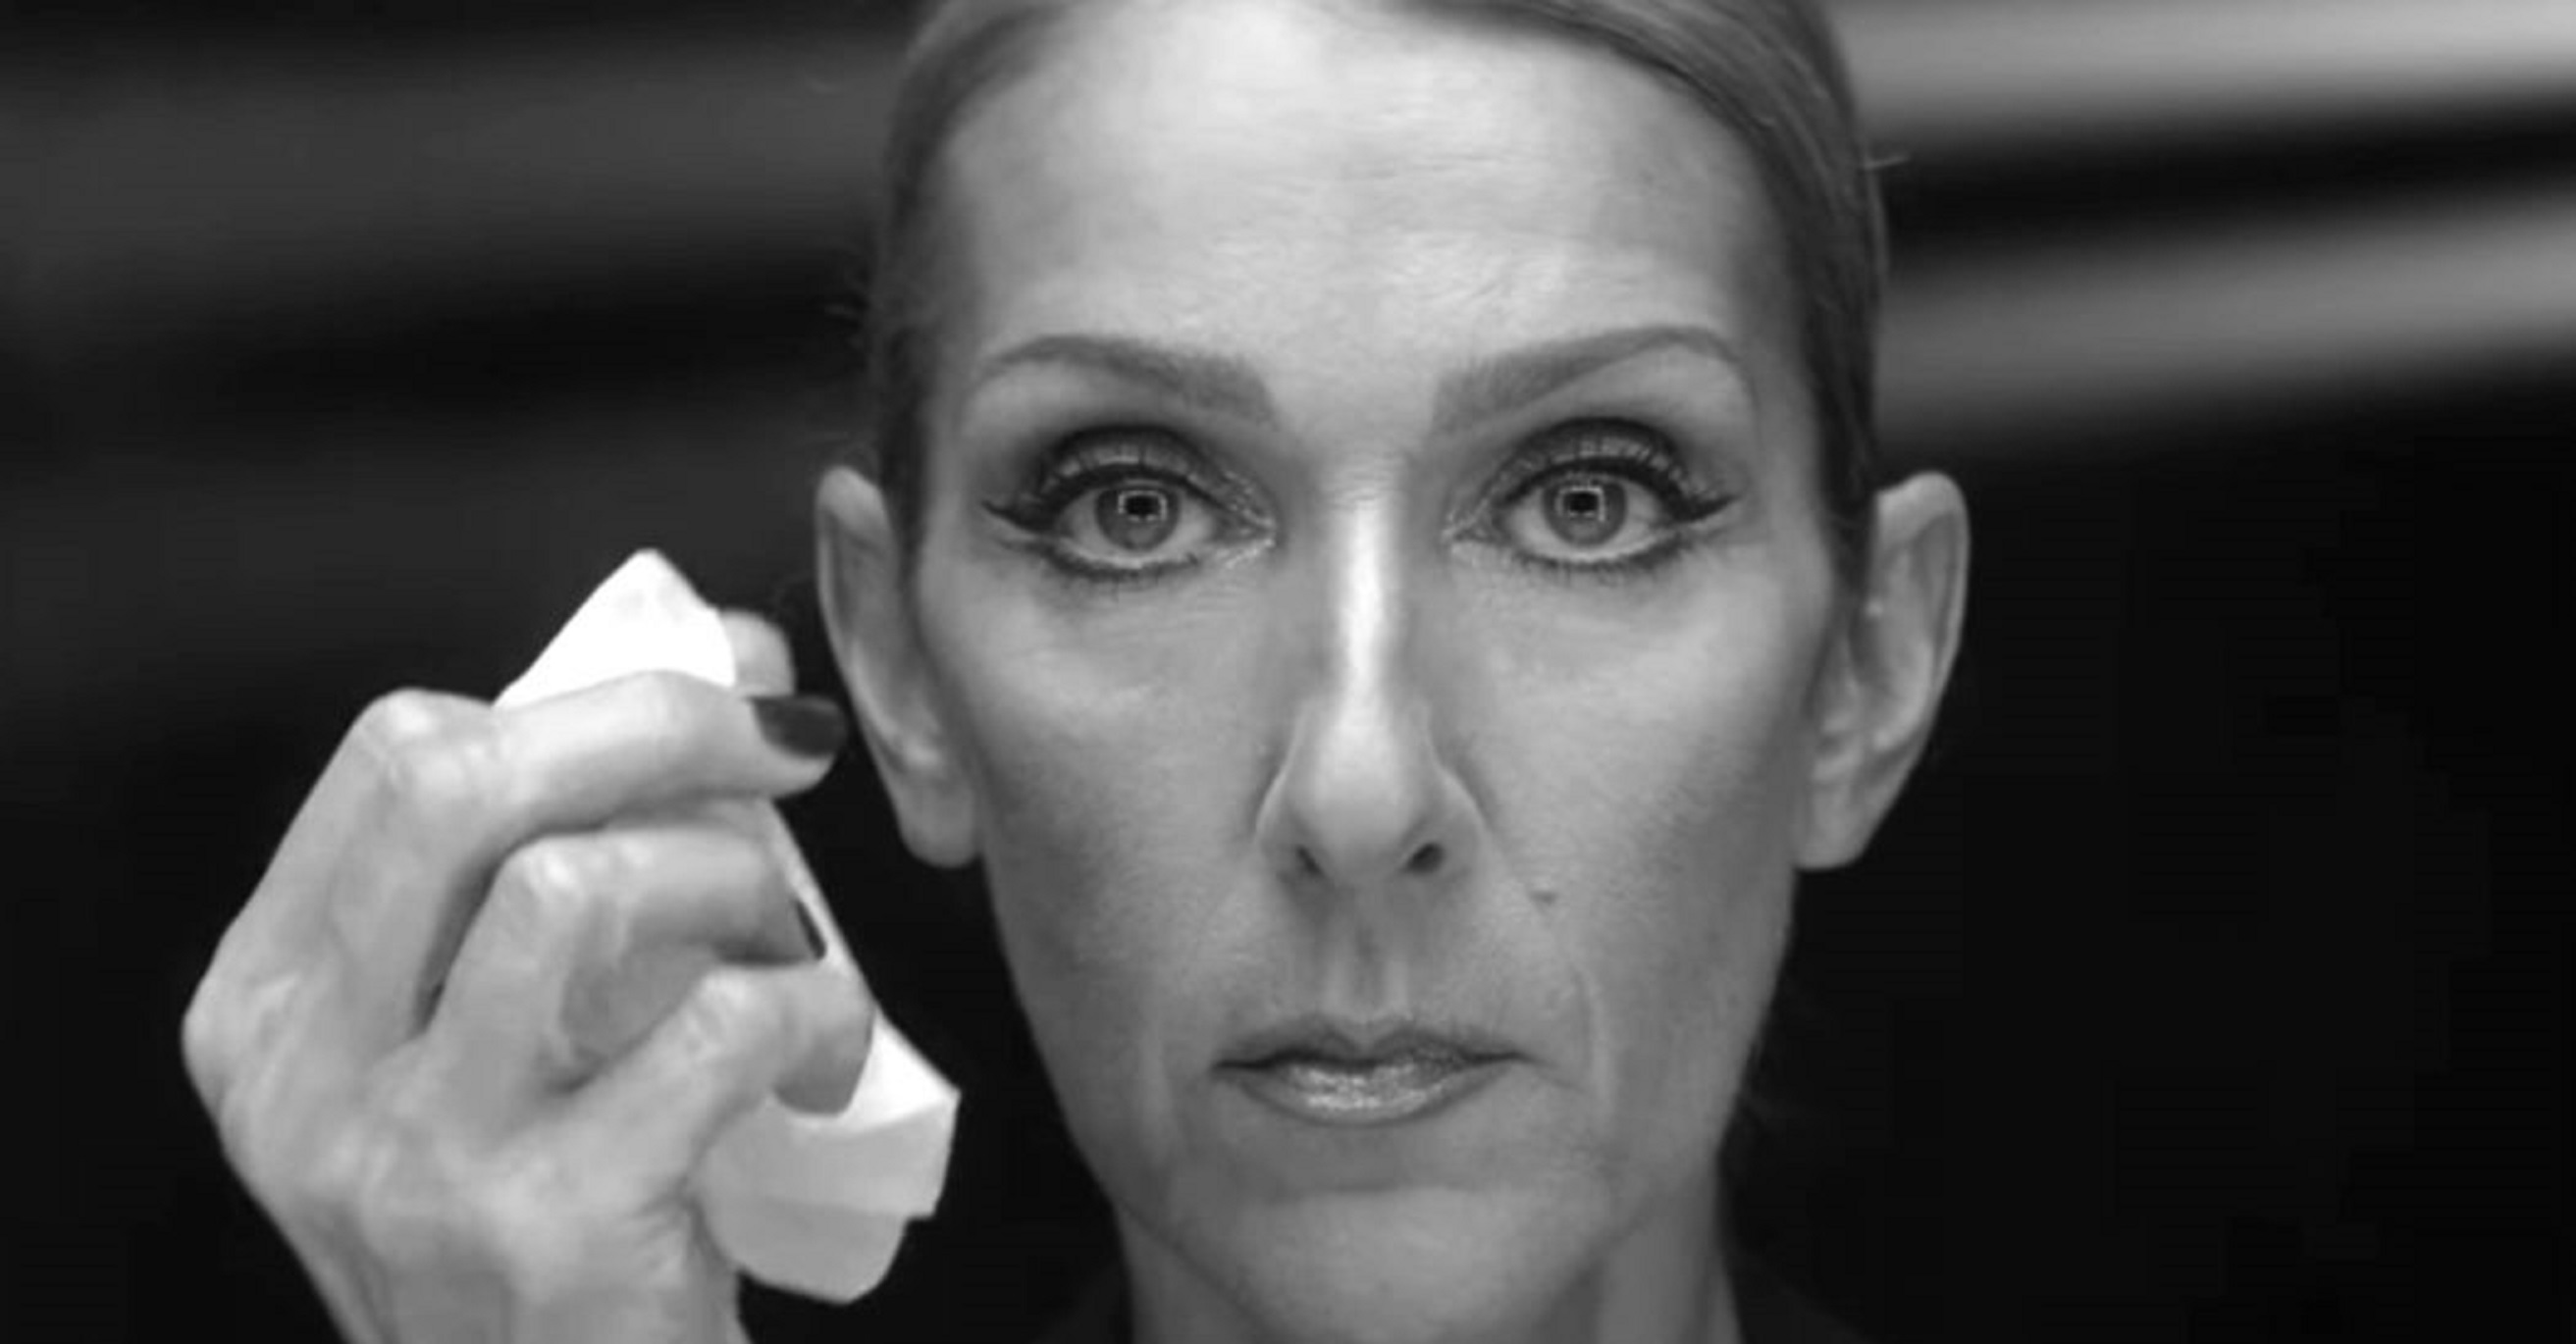 Celine Dion is Here With a NEW Song and Music Video for ‘Courage’, Watch Here!